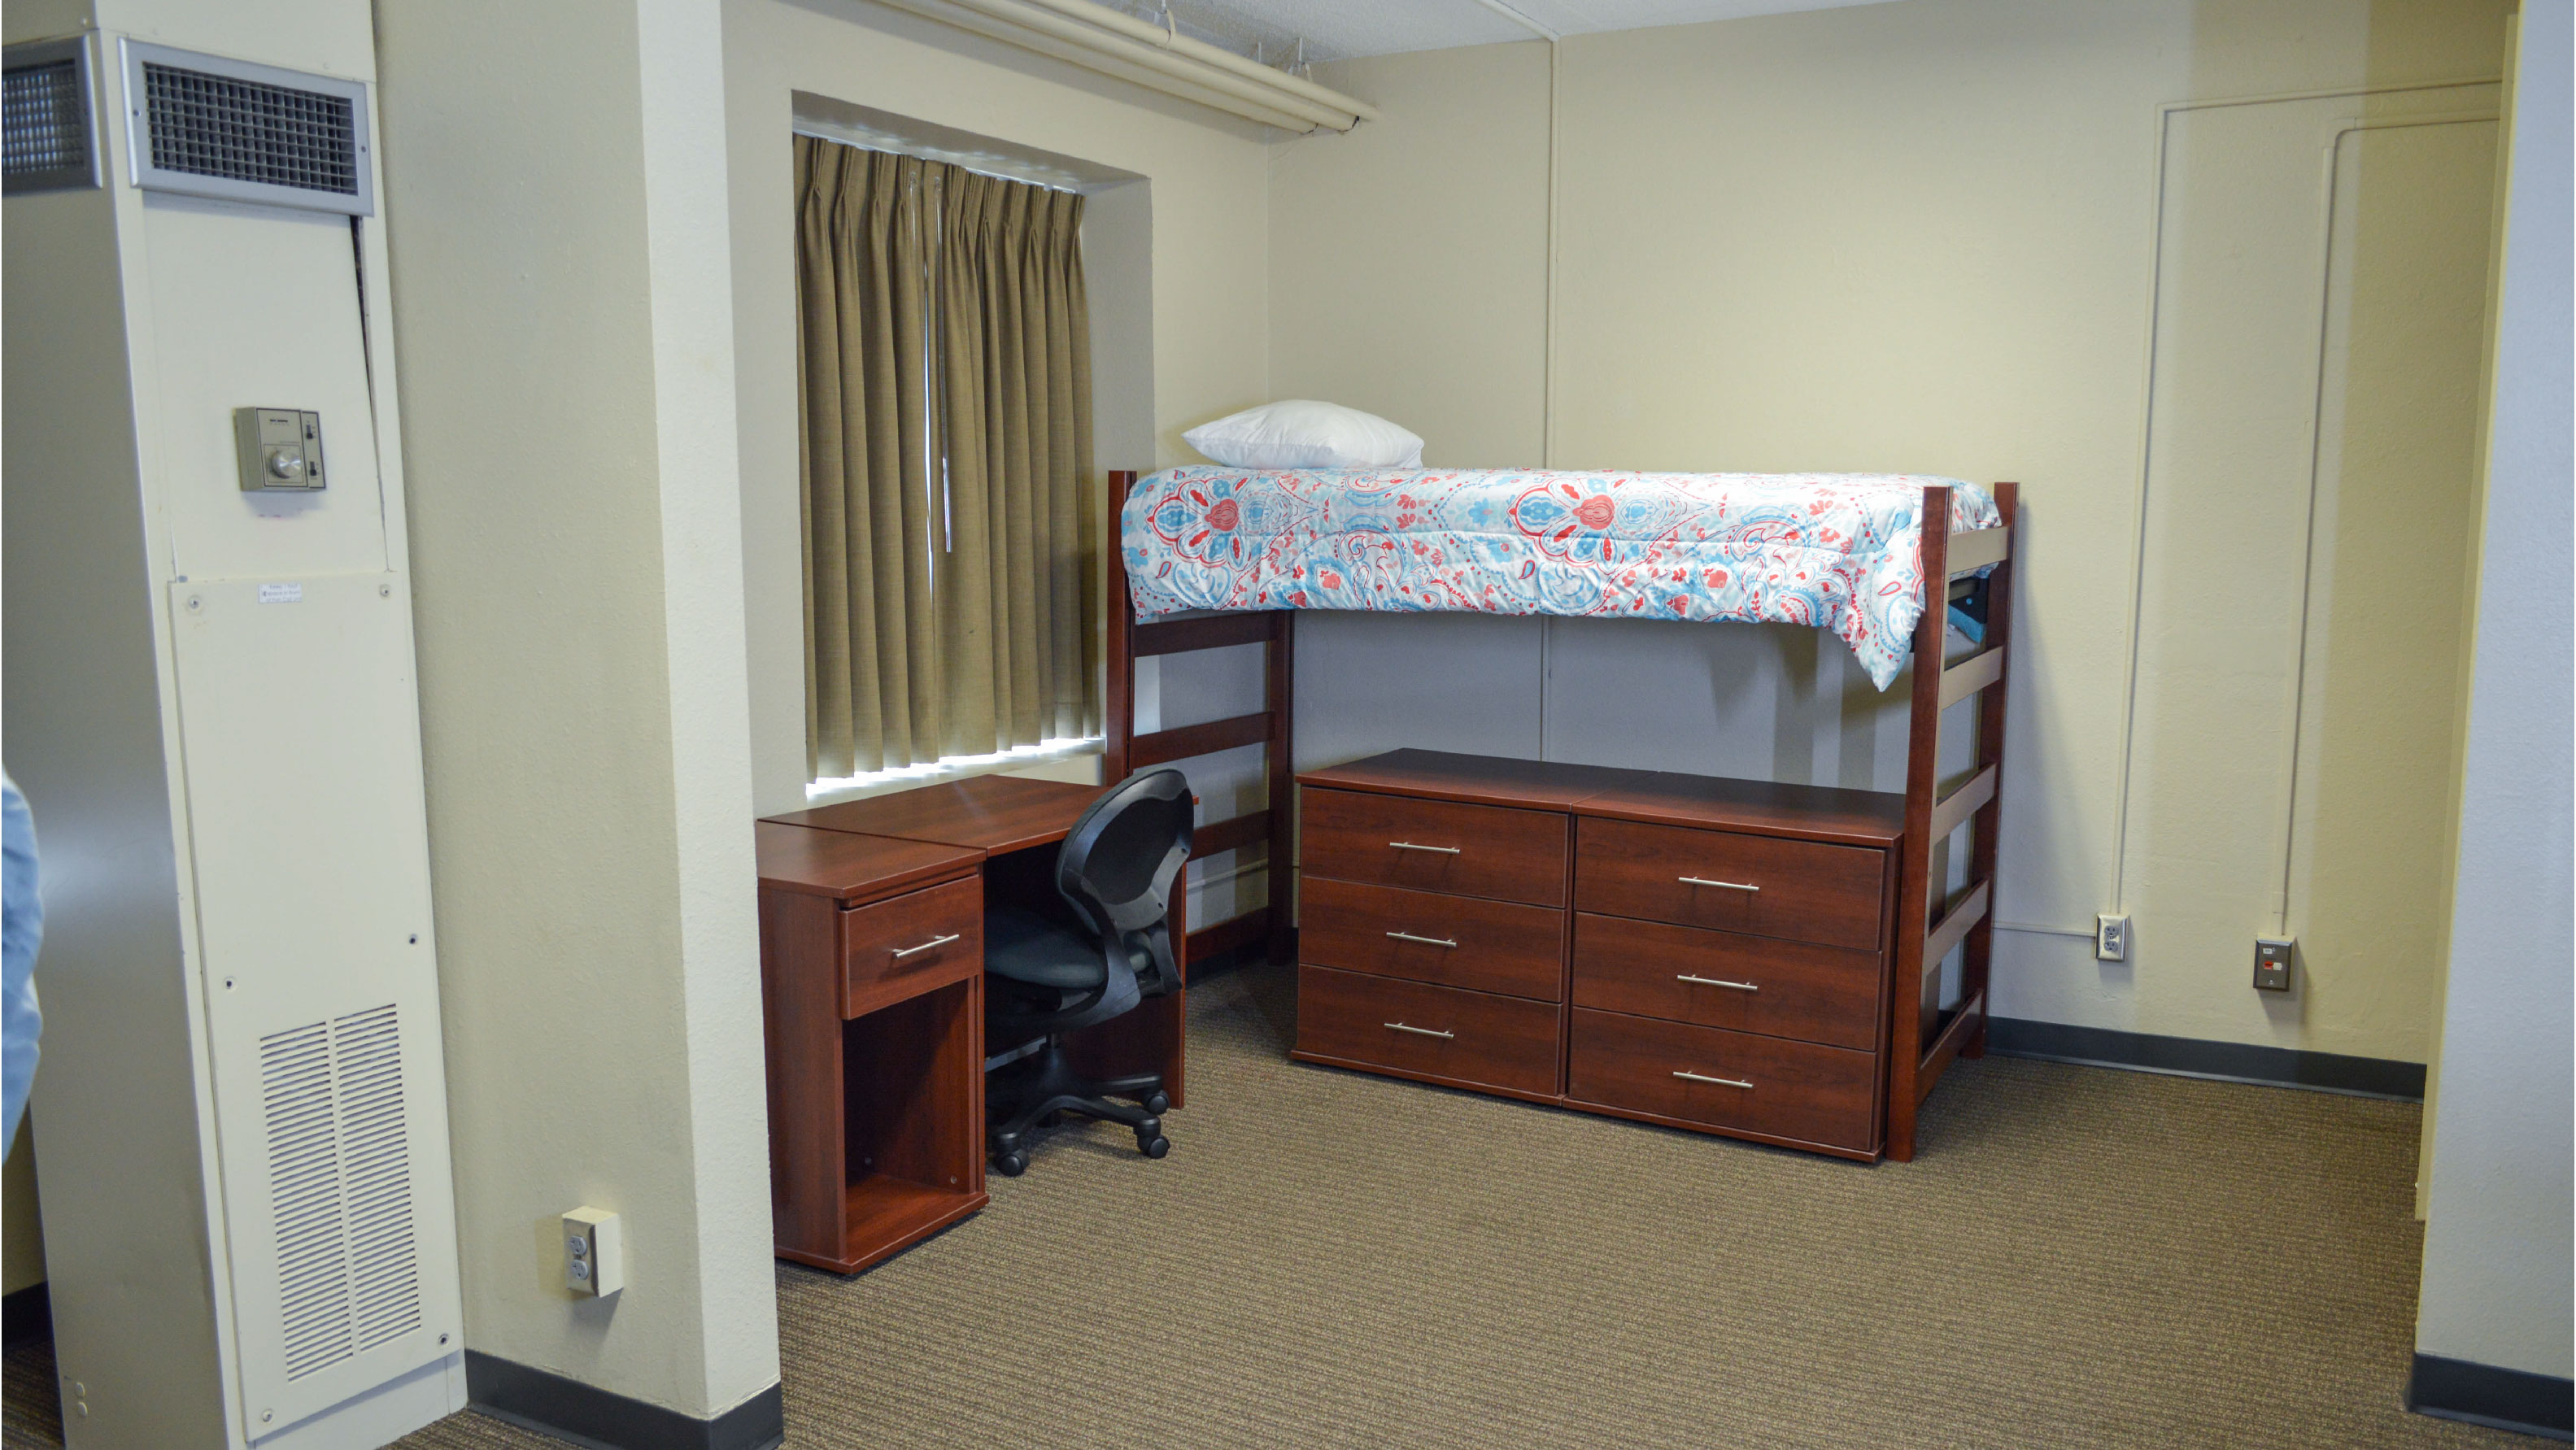 Bedroom with lofted bed desk and set of drawers